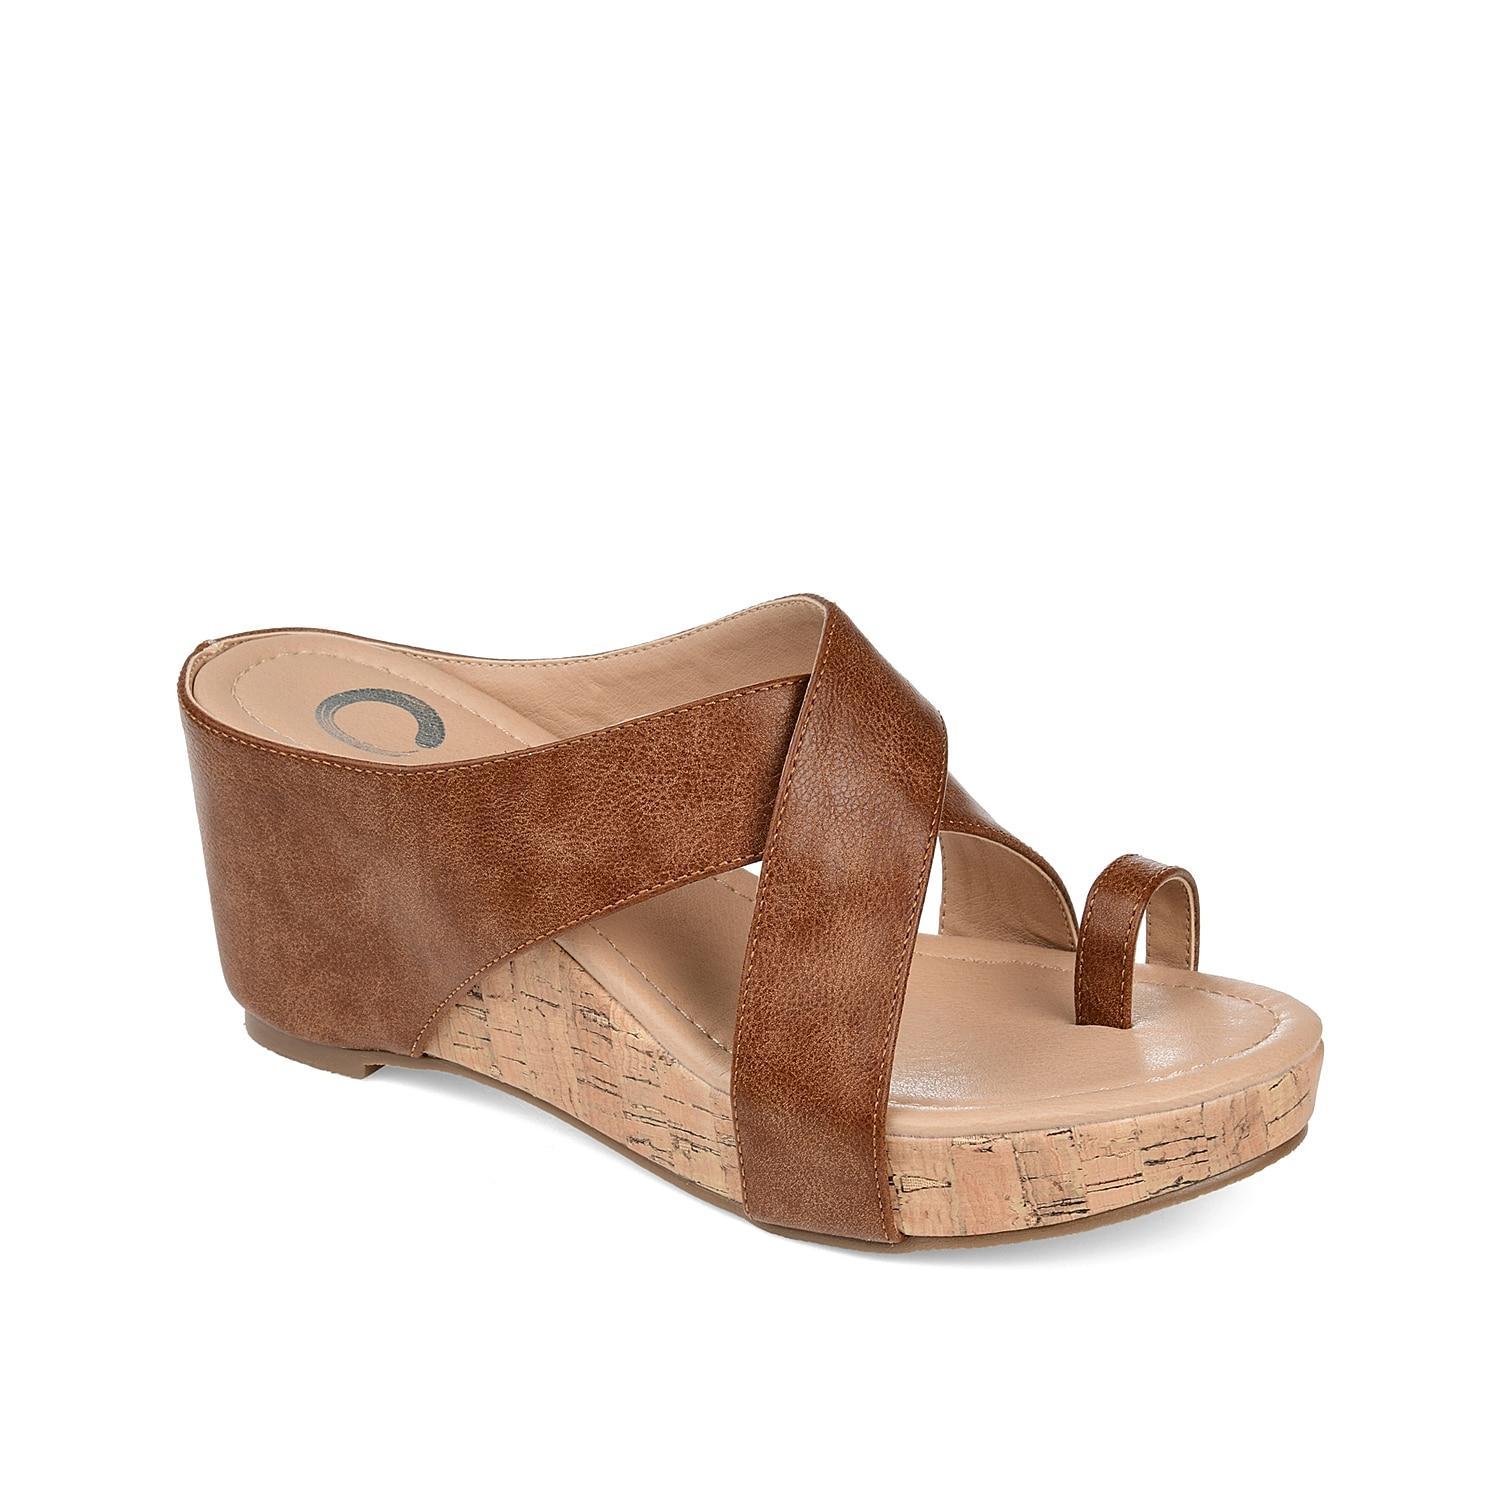 Journee Collection Rayna Womens Wedge Sandals Brown Product Image